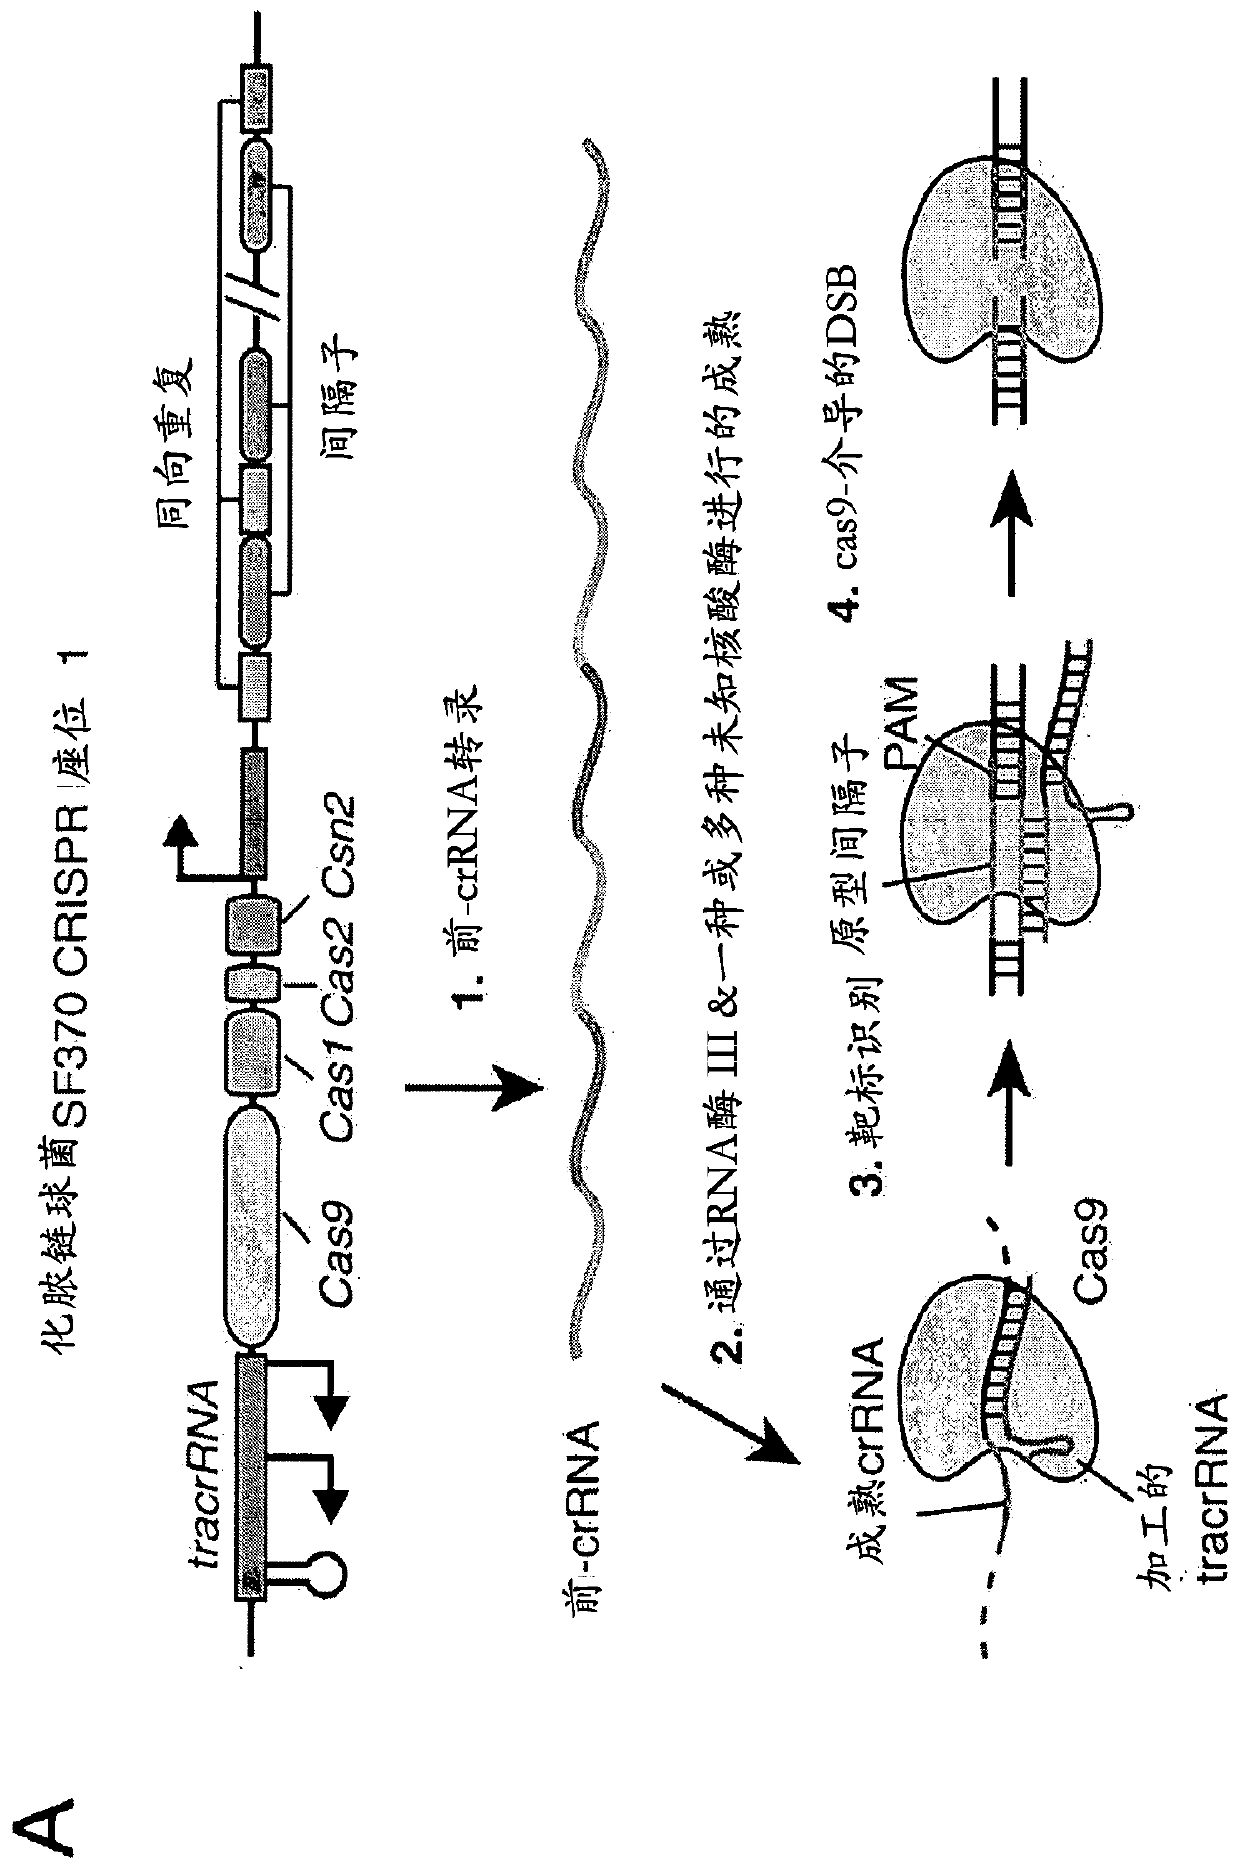 Delivery, engineering and optimization of systems, methods and compositions for sequence manipulation and therapeutic applications